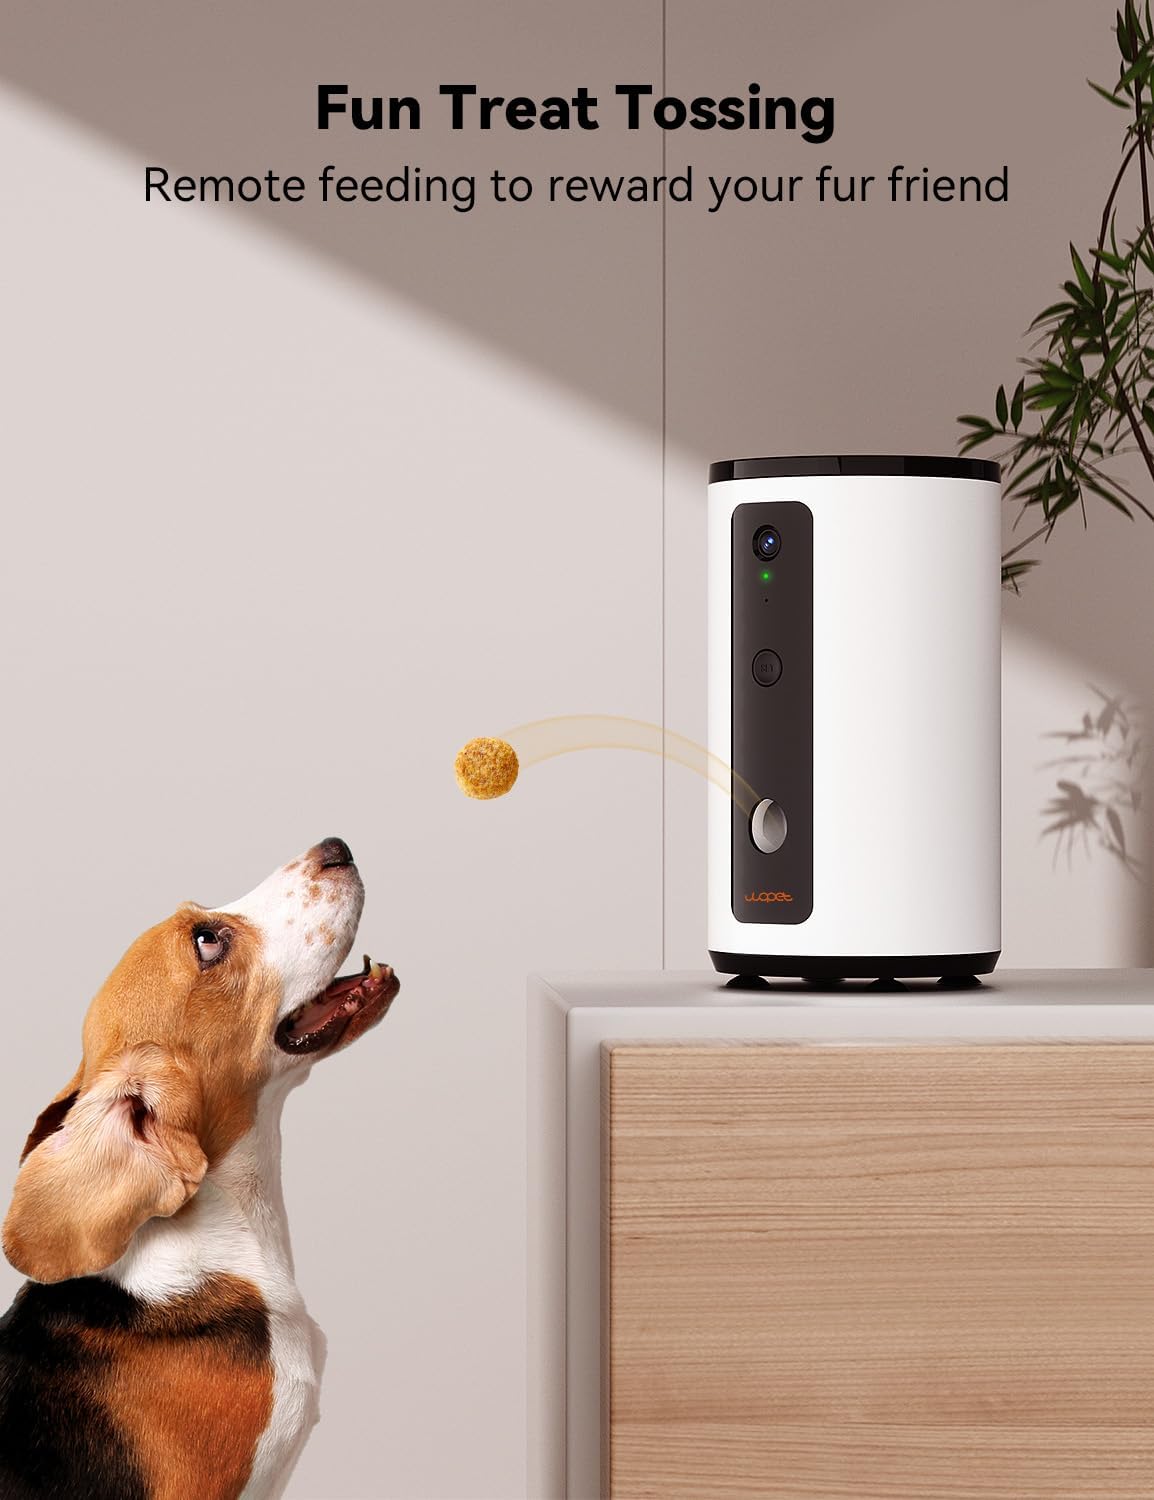 WOpet Smart Pet Camera:Dog Treat Dispenser, Full HD WiFi Pet Camera with  Night Vision for